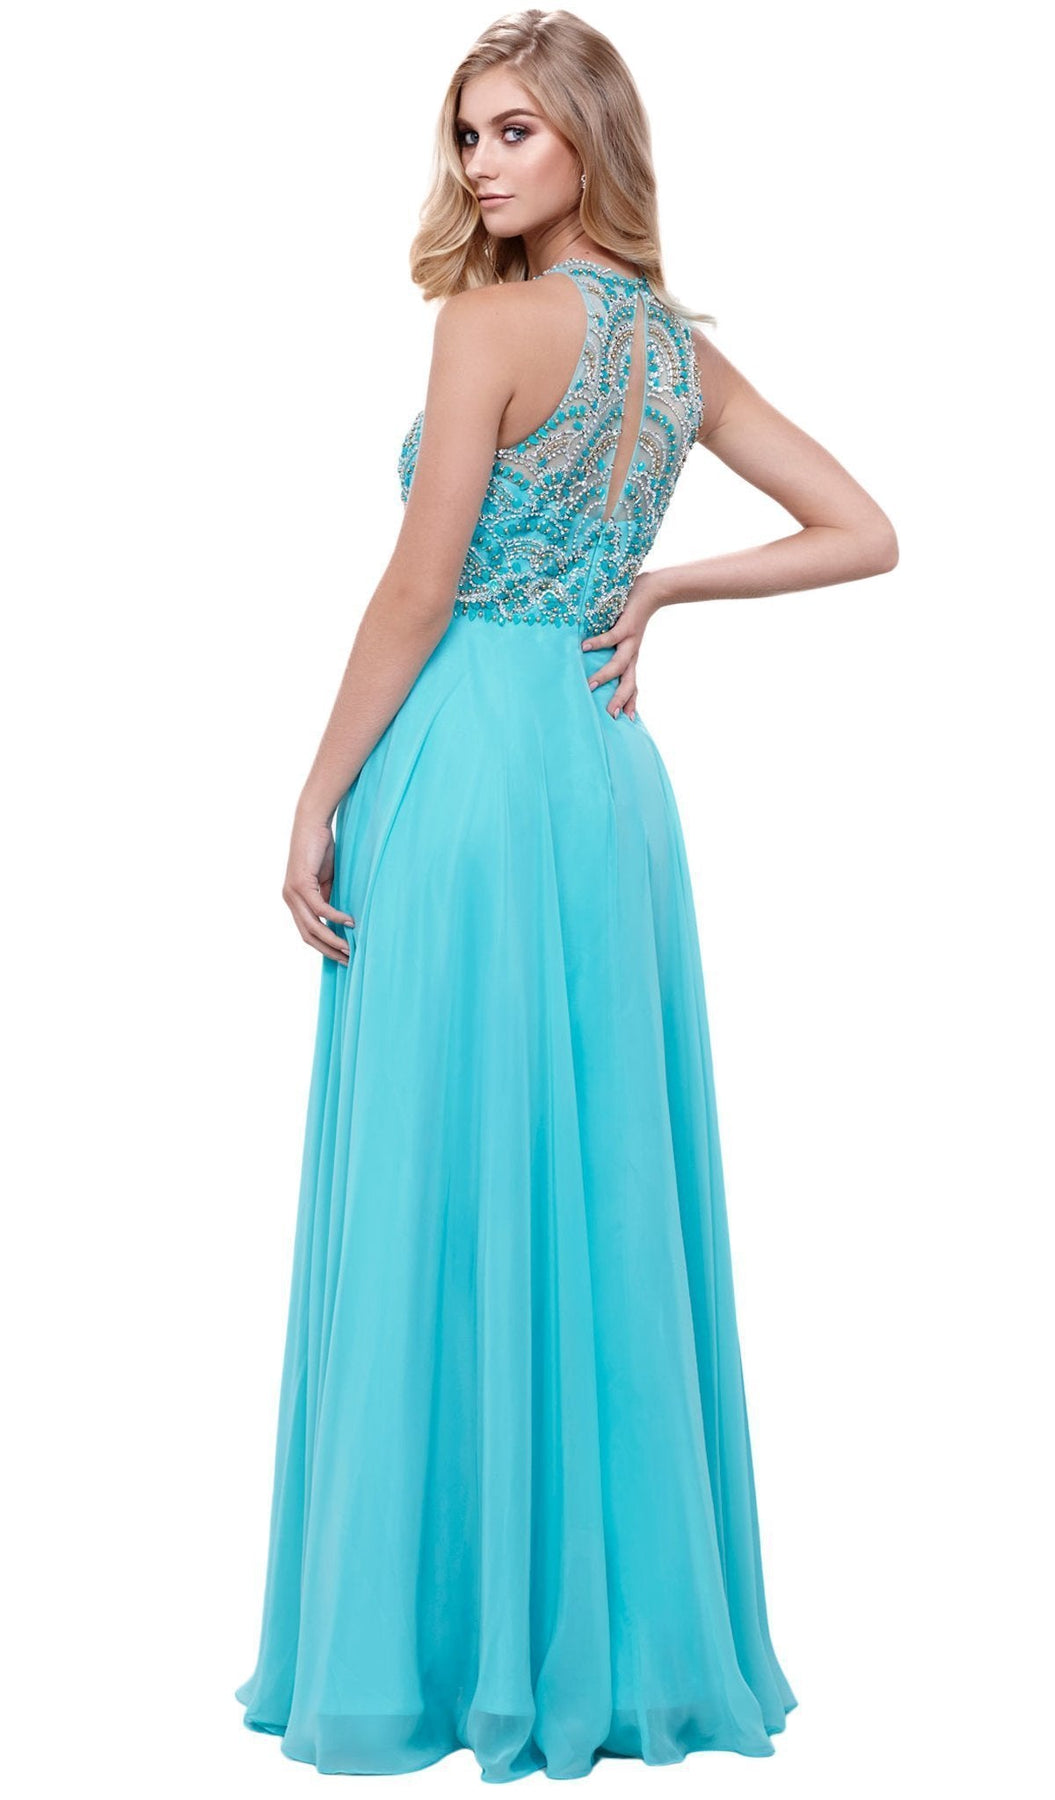 Nox Anabel - 8277 Sleeveless High Neck Beaded Bodice A-line Dress Special Occasion Dress